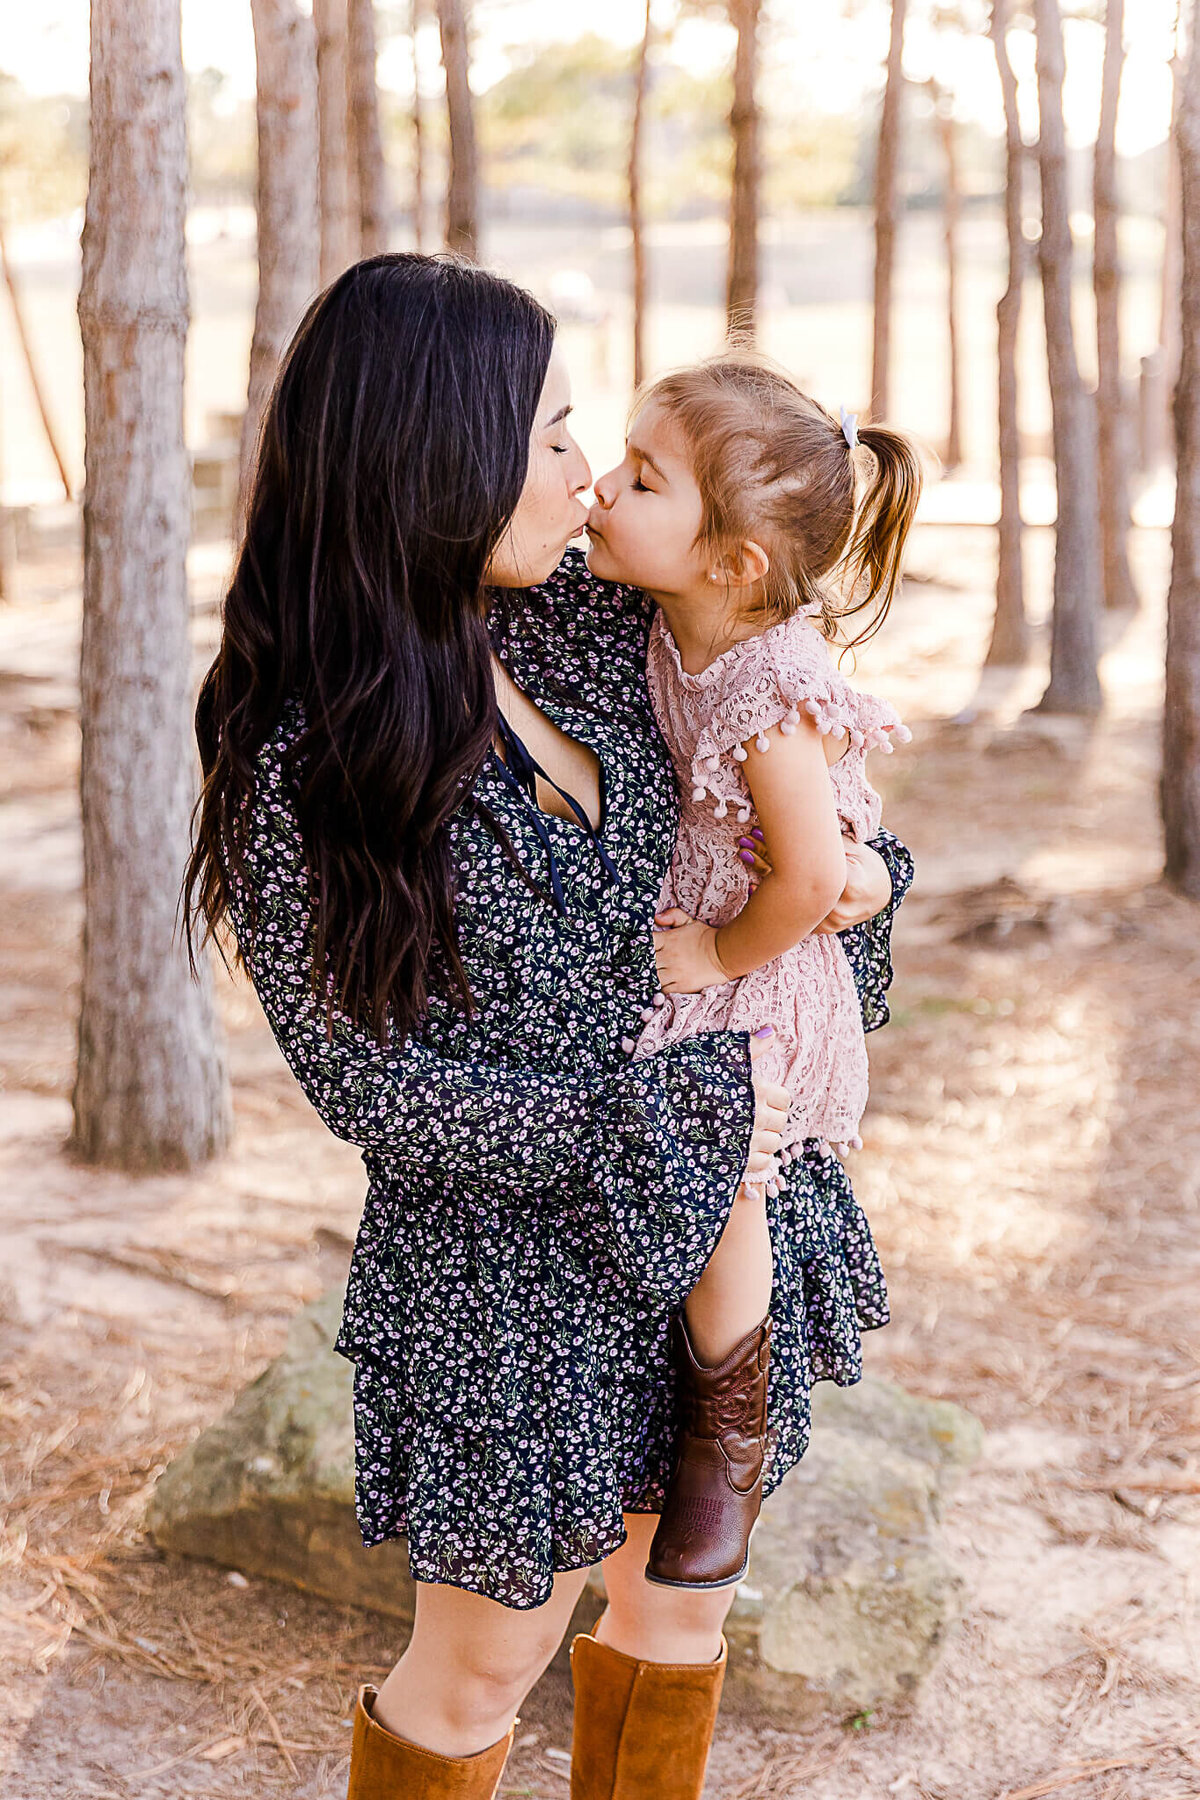 Mom holding and kissing daughter